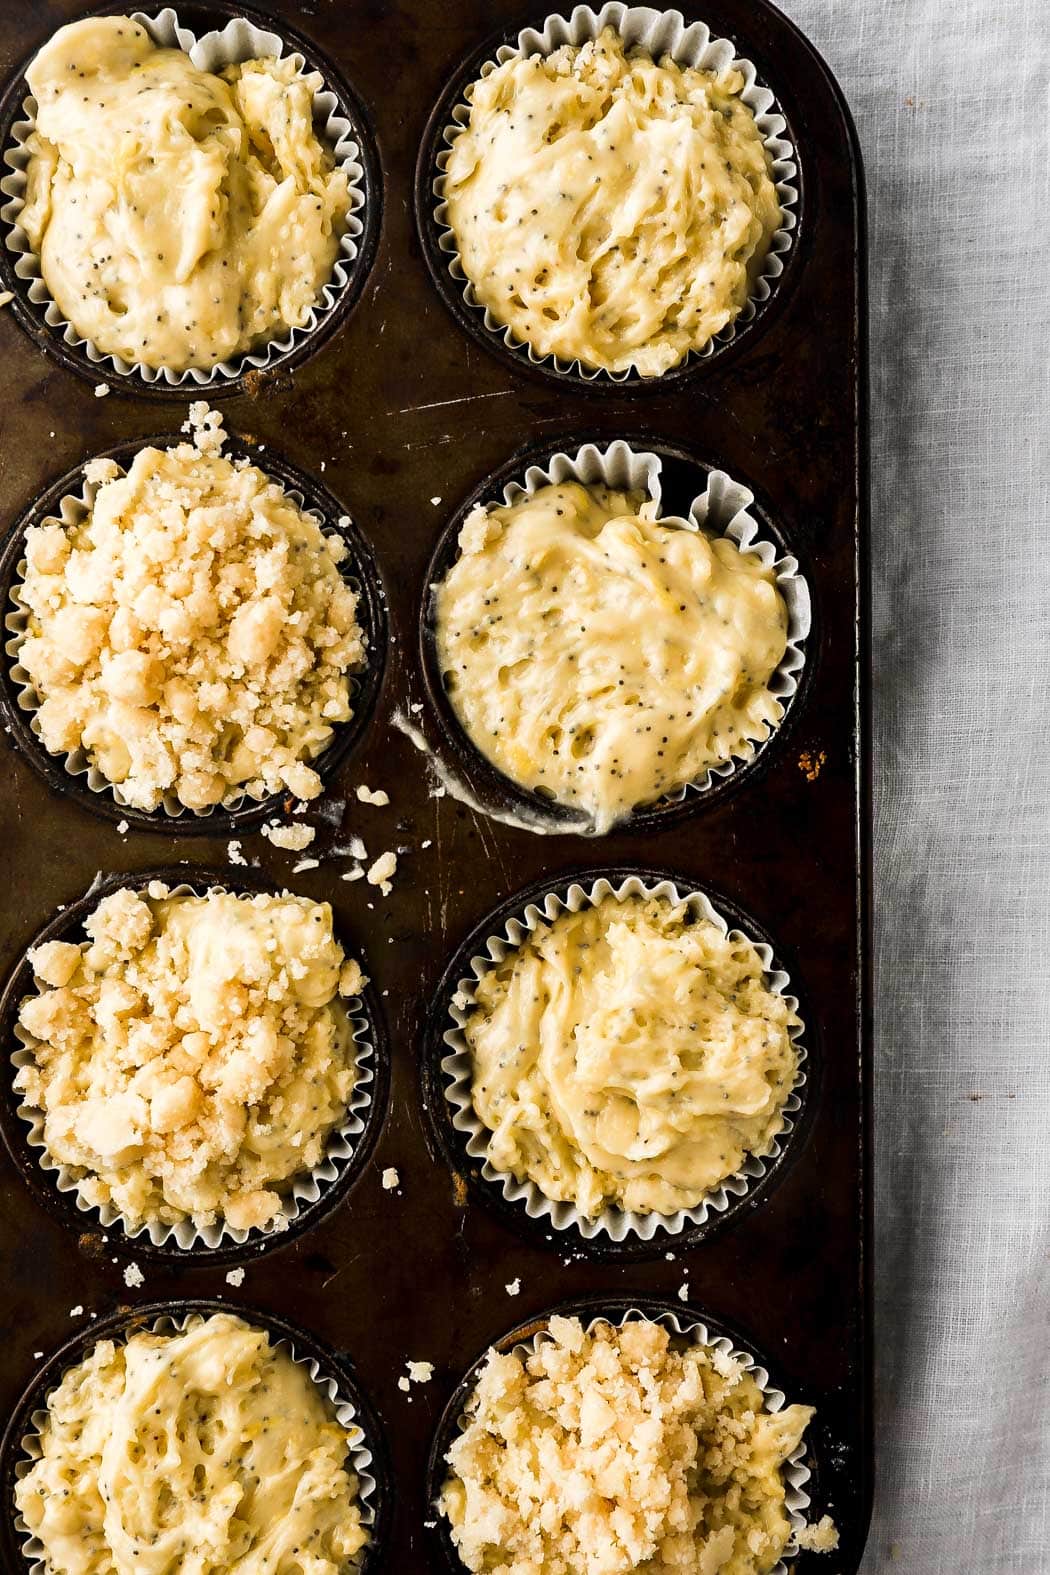 fill muffin pans, top with *optional* streusel